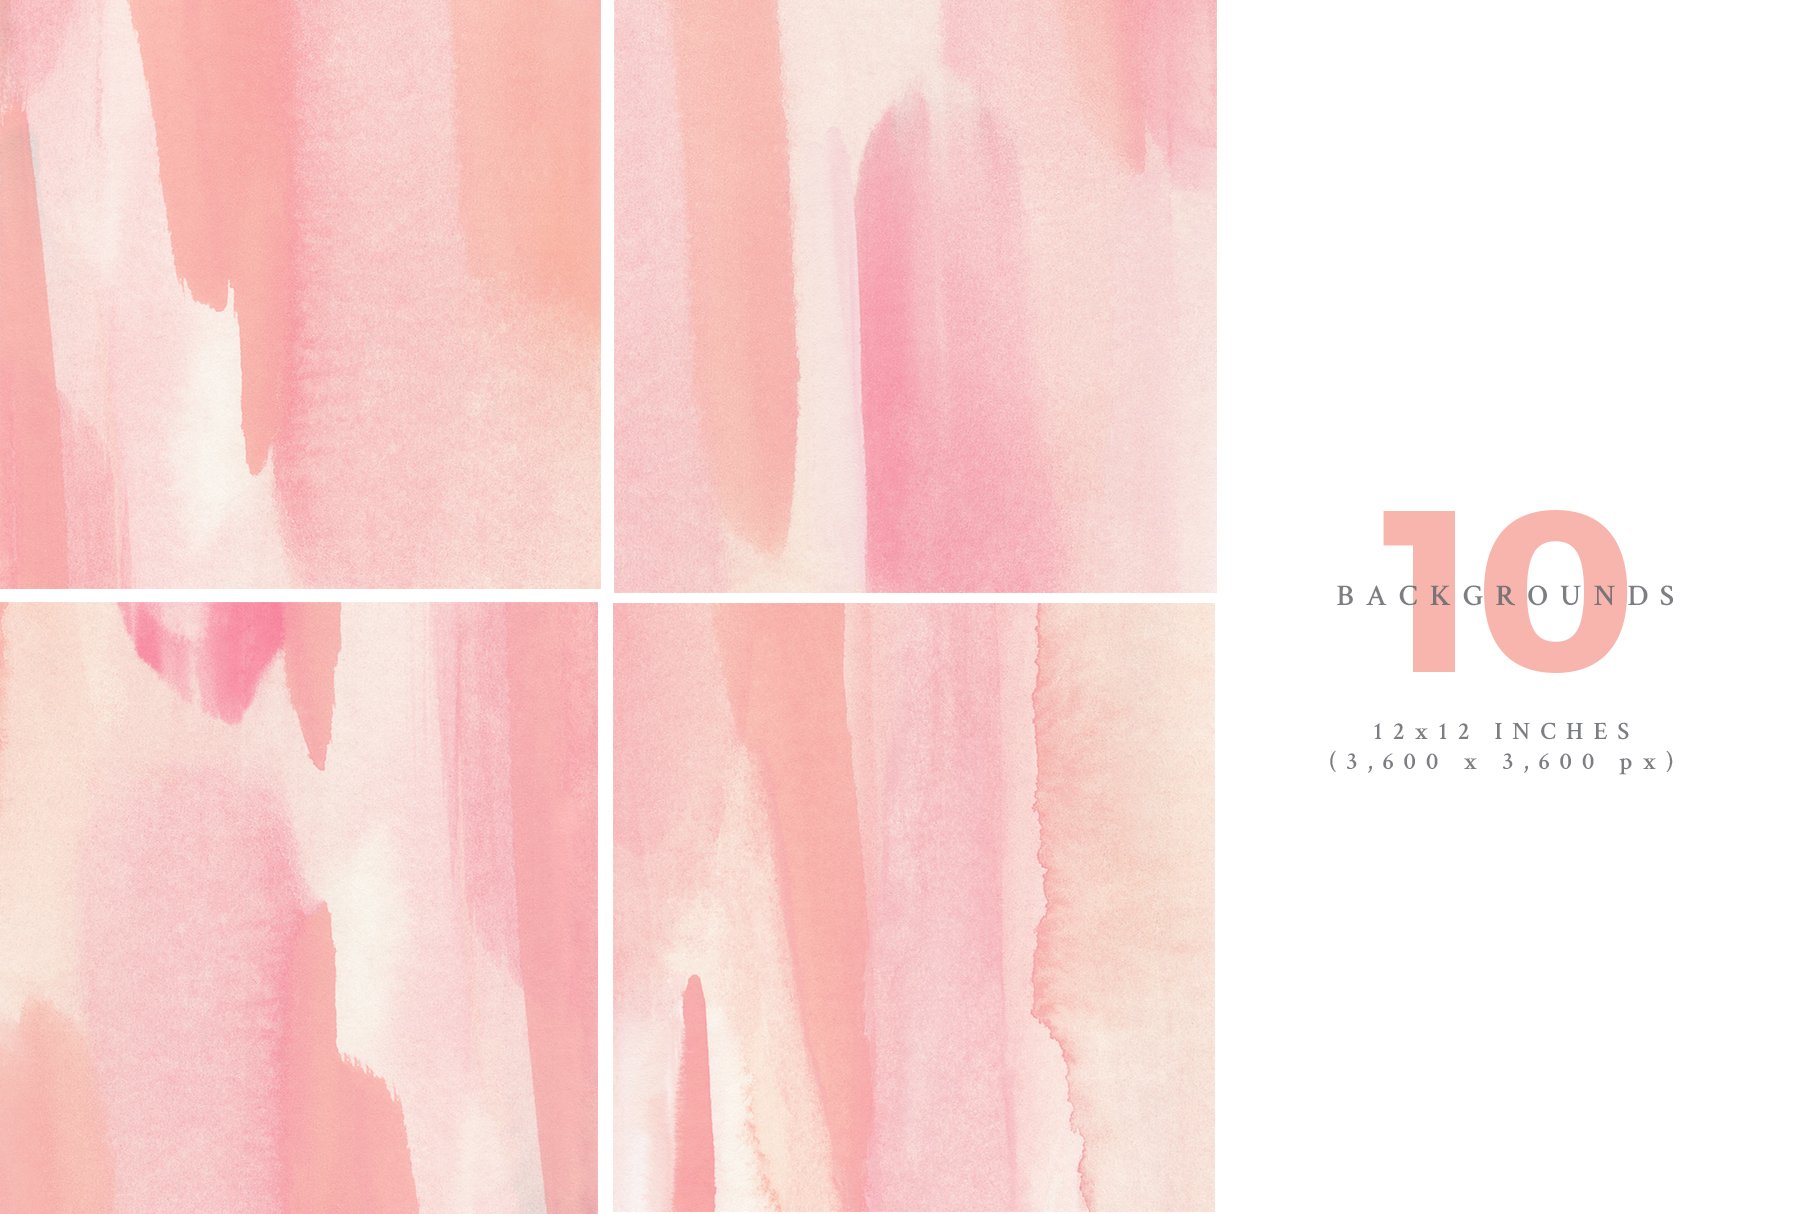 Watercolor Backgrounds - Blush preview image.